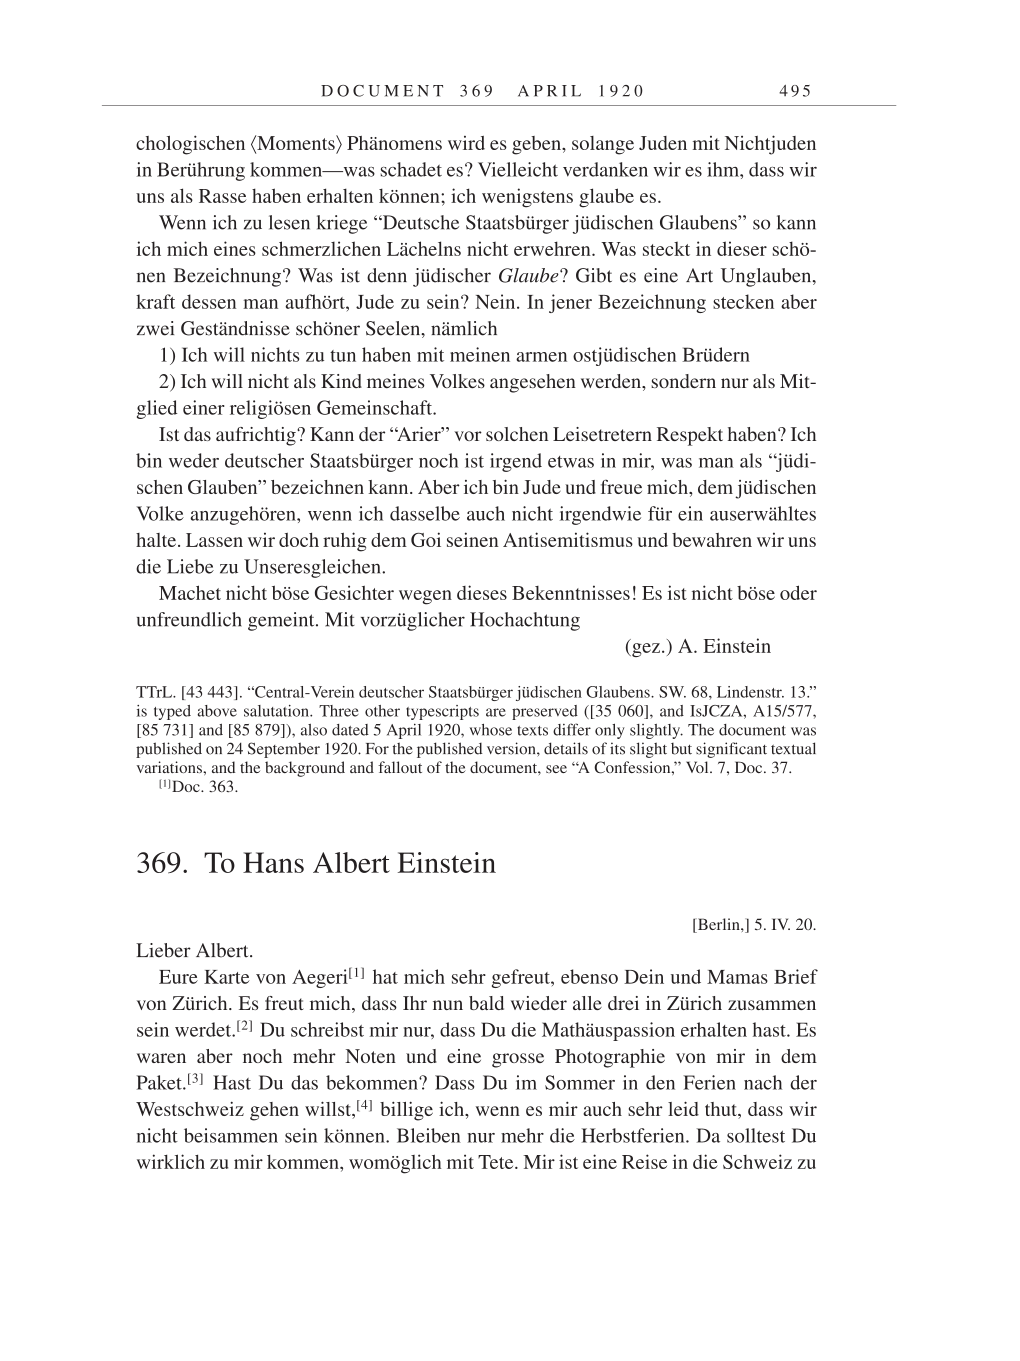 Volume 9: The Berlin Years: Correspondence January 1919-April 1920 page 495